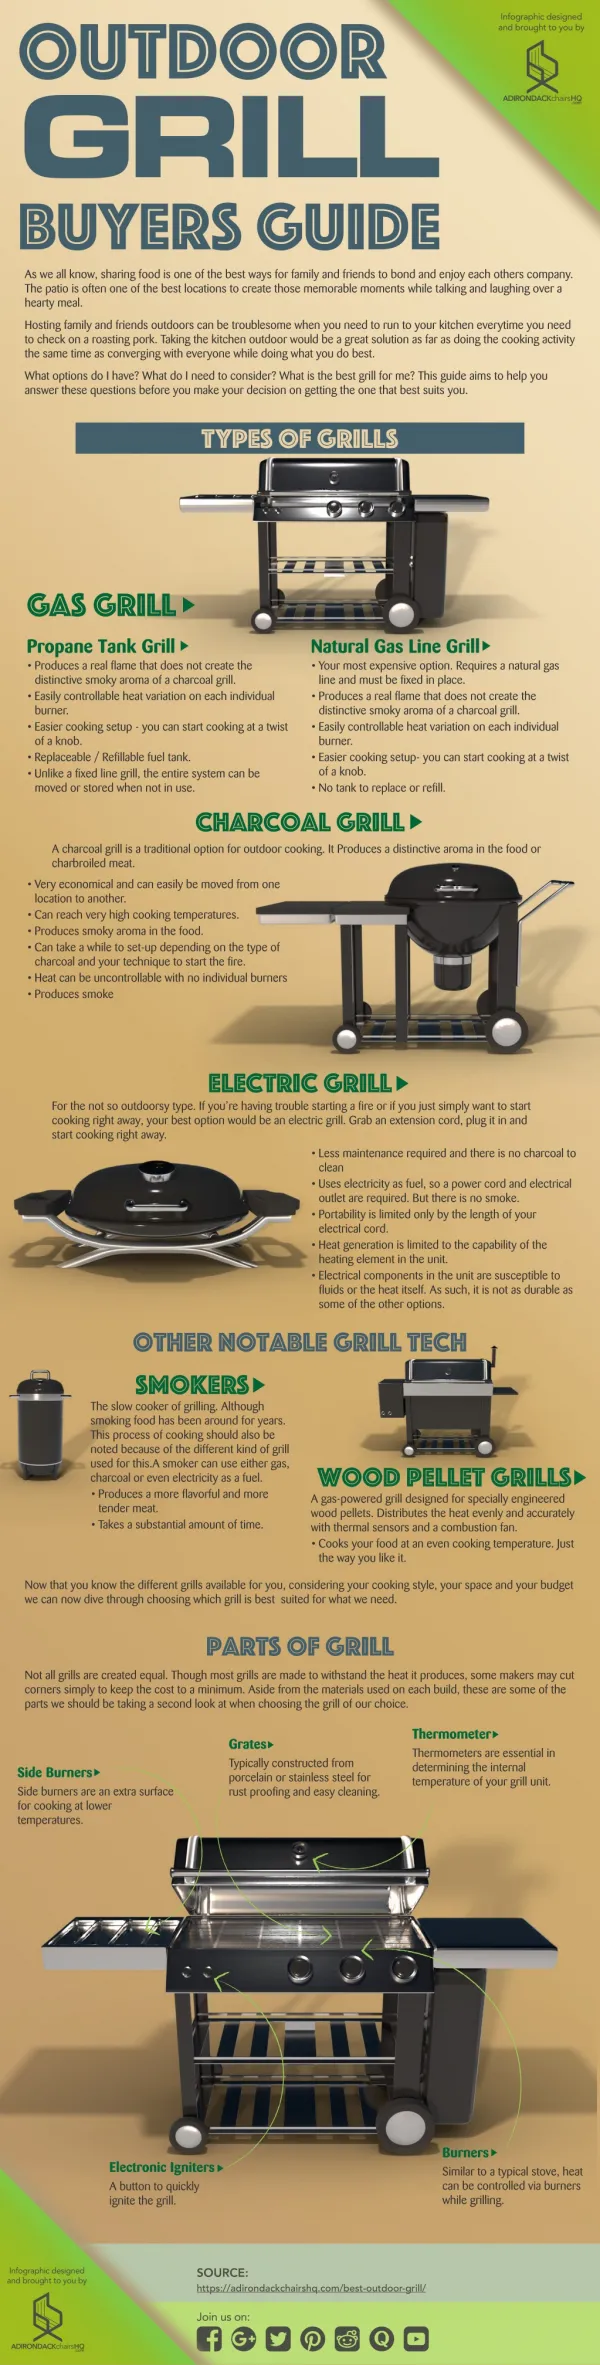 The Complete Graphical Buyers Guide to Outdoor Grill